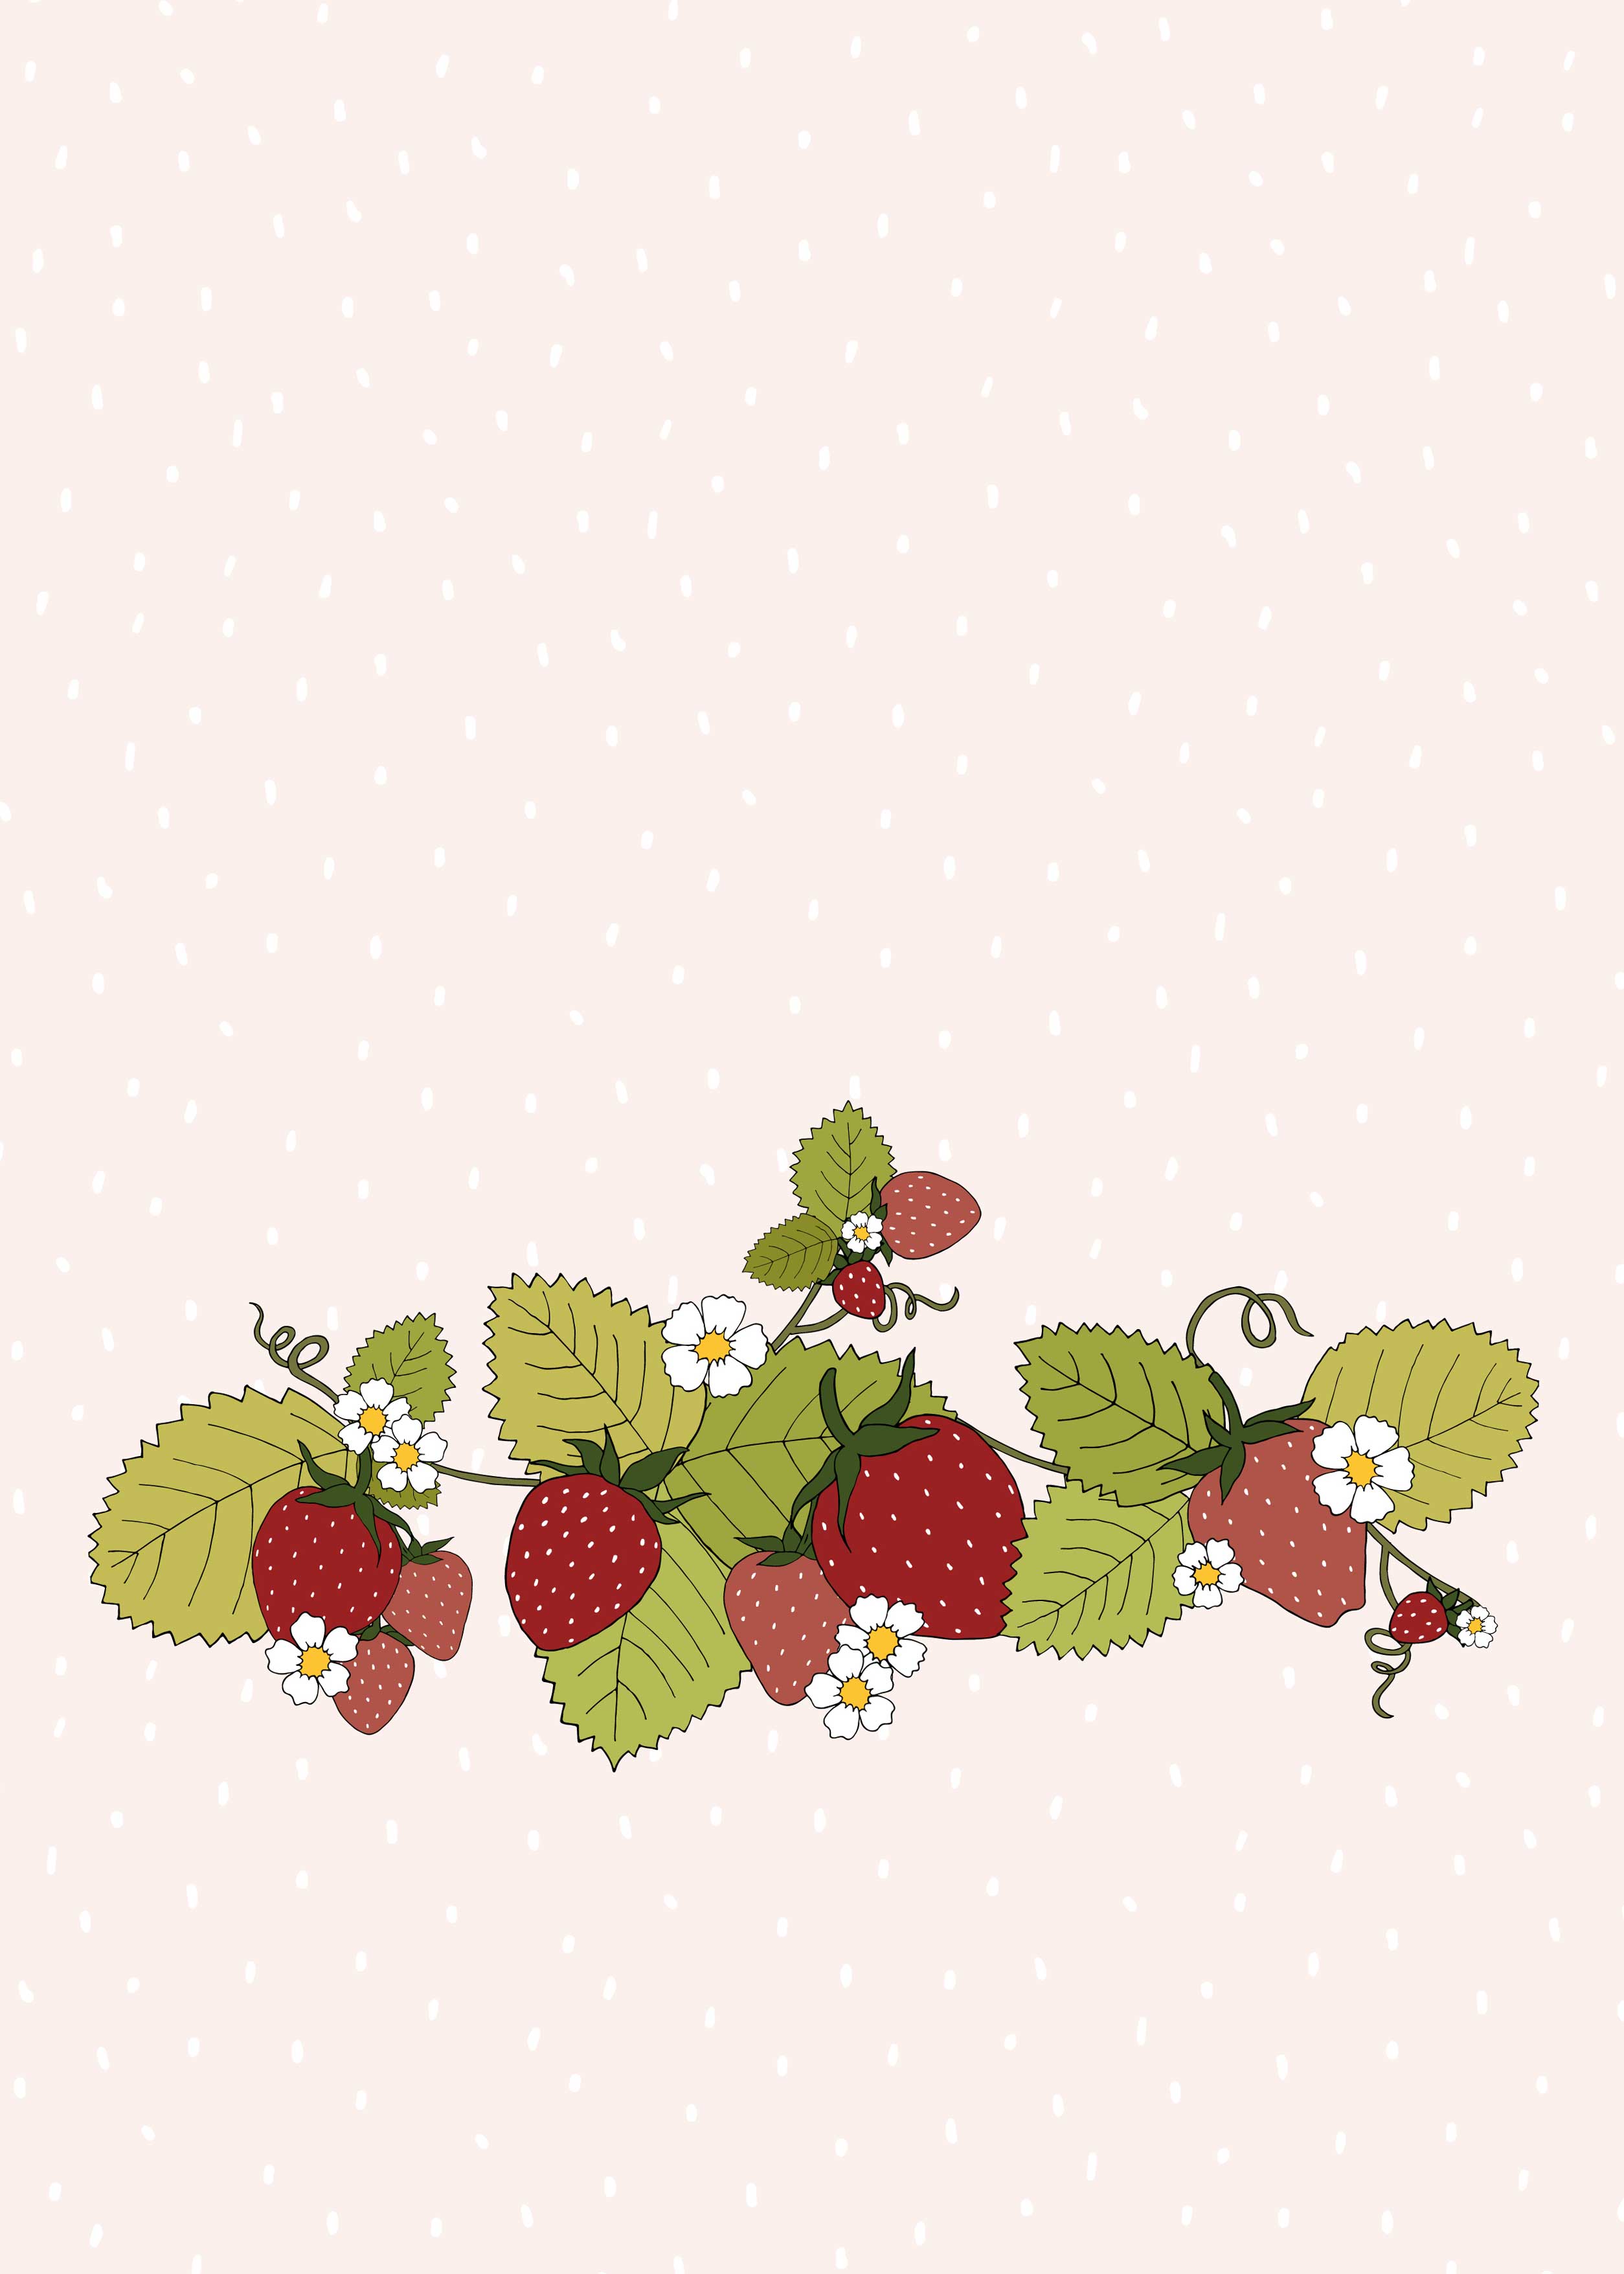 Strawberry iPhone 8 Wallpaper HD  Strawberry iPhone 8 Wallp  Flickr